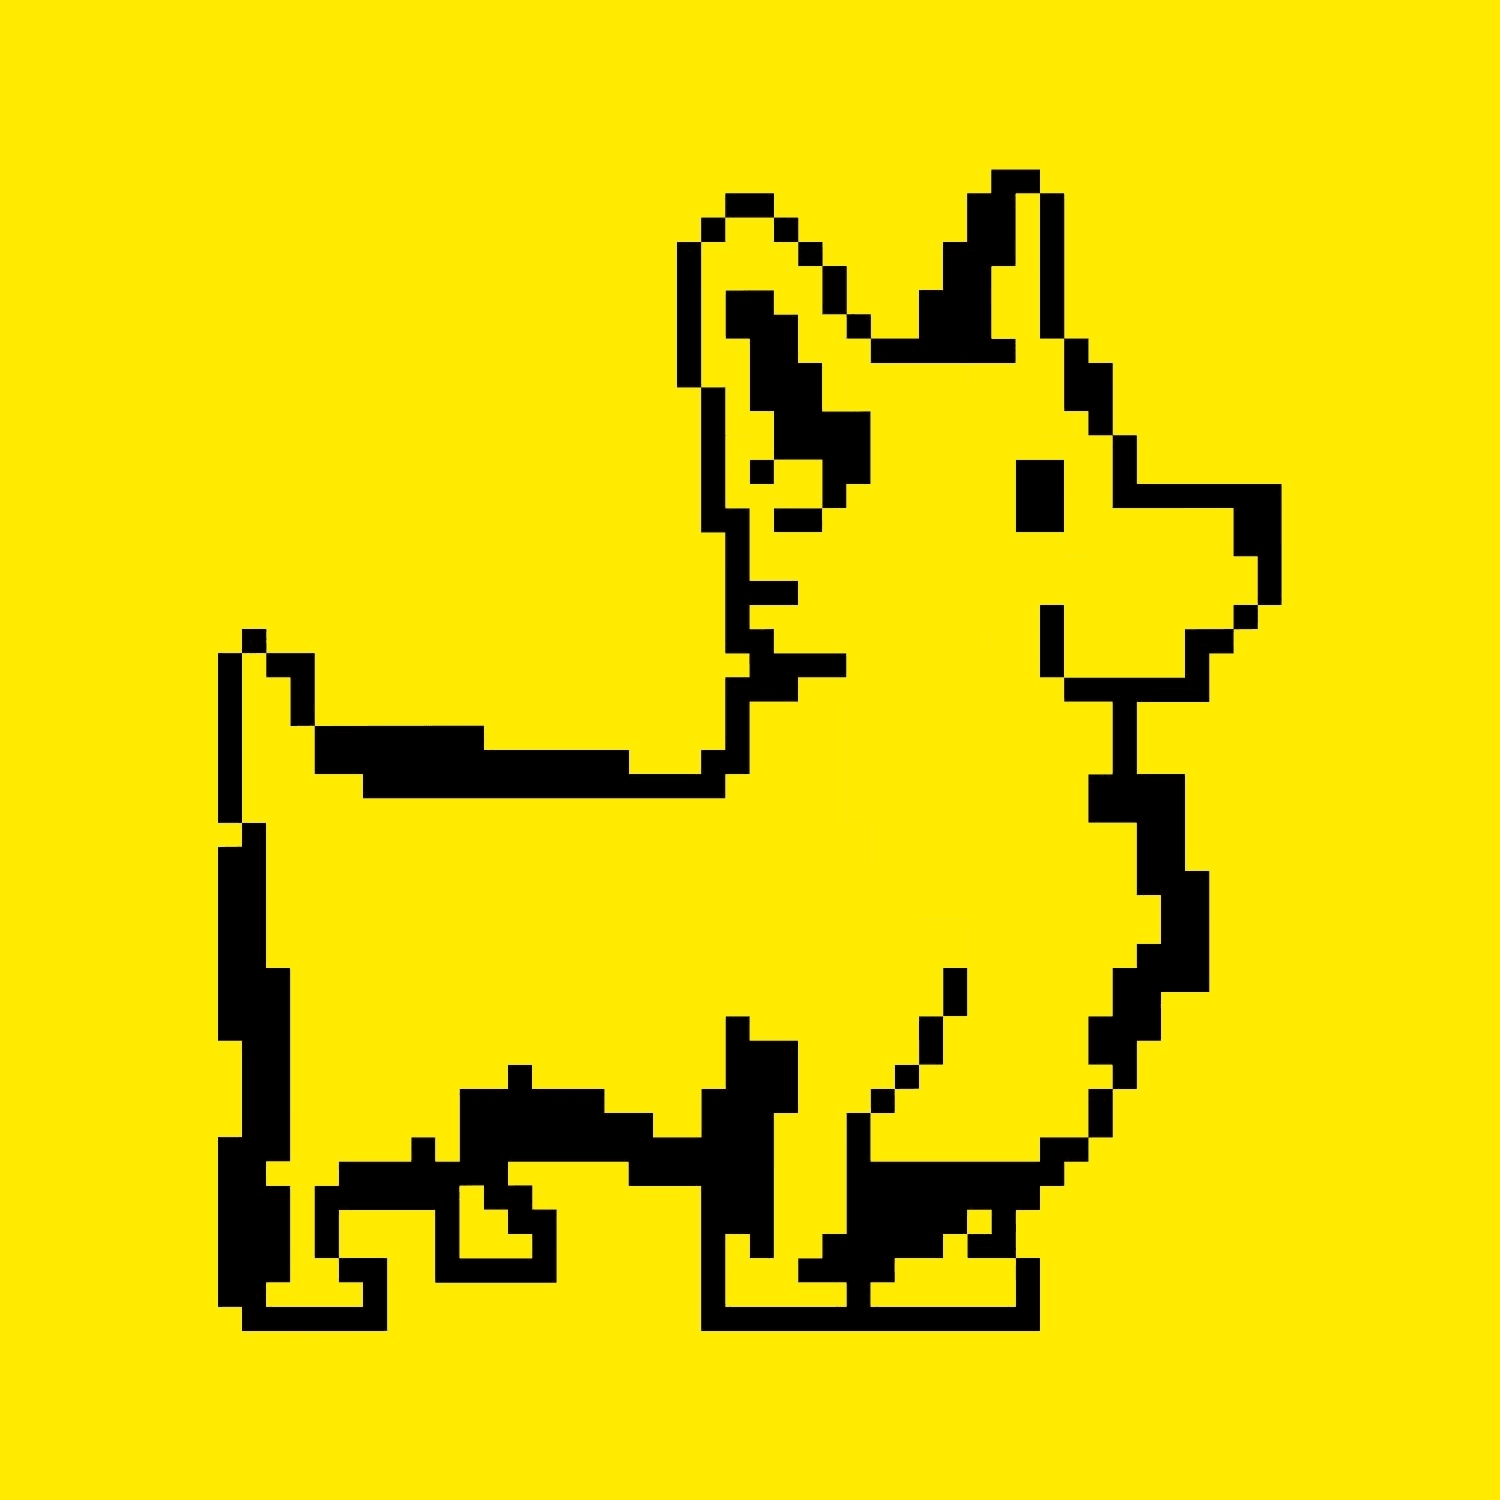 Pixelated Corgi #21 (Airdrop) - 🔥 Don't Miss Out on New Hot Items